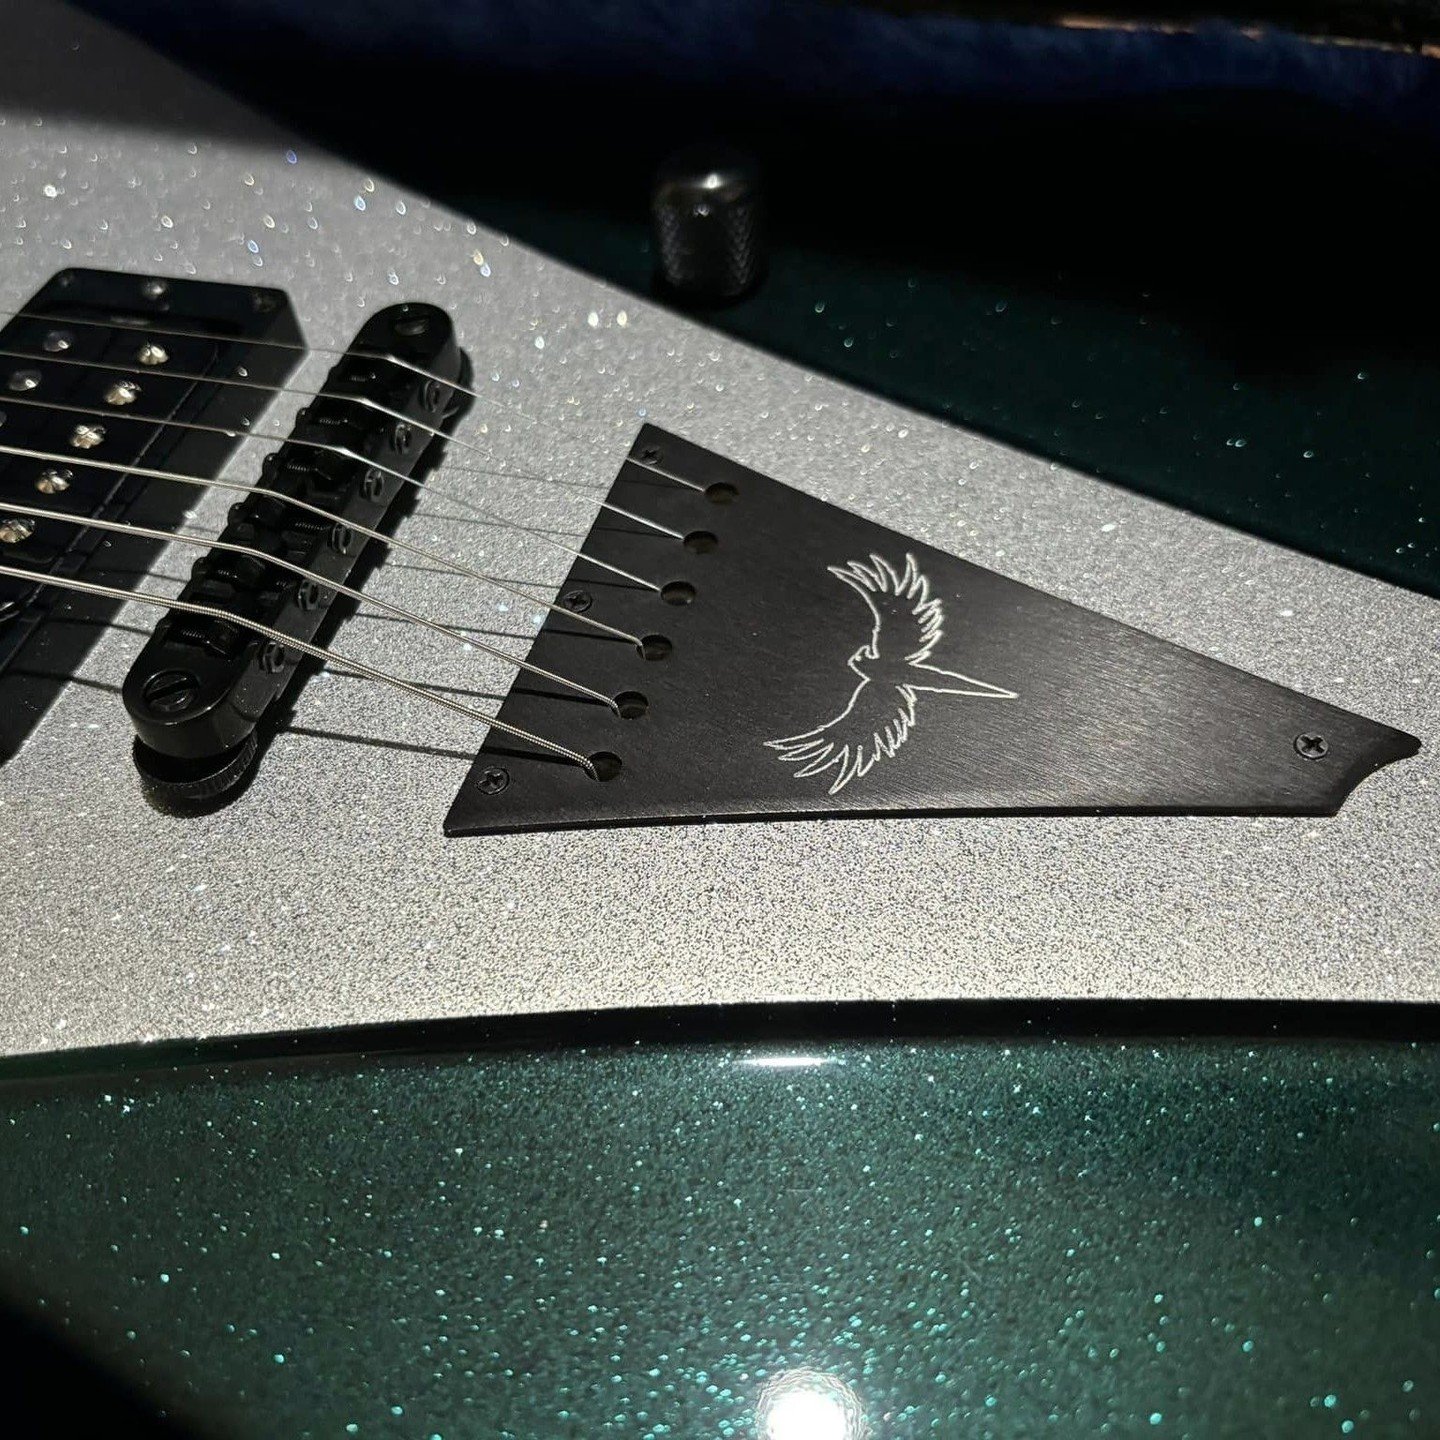 Awesome detail of our custom-etched Raven tailpiece 📸 from our friend Tony

#sullyguitars #builtbyrockandroll #raven